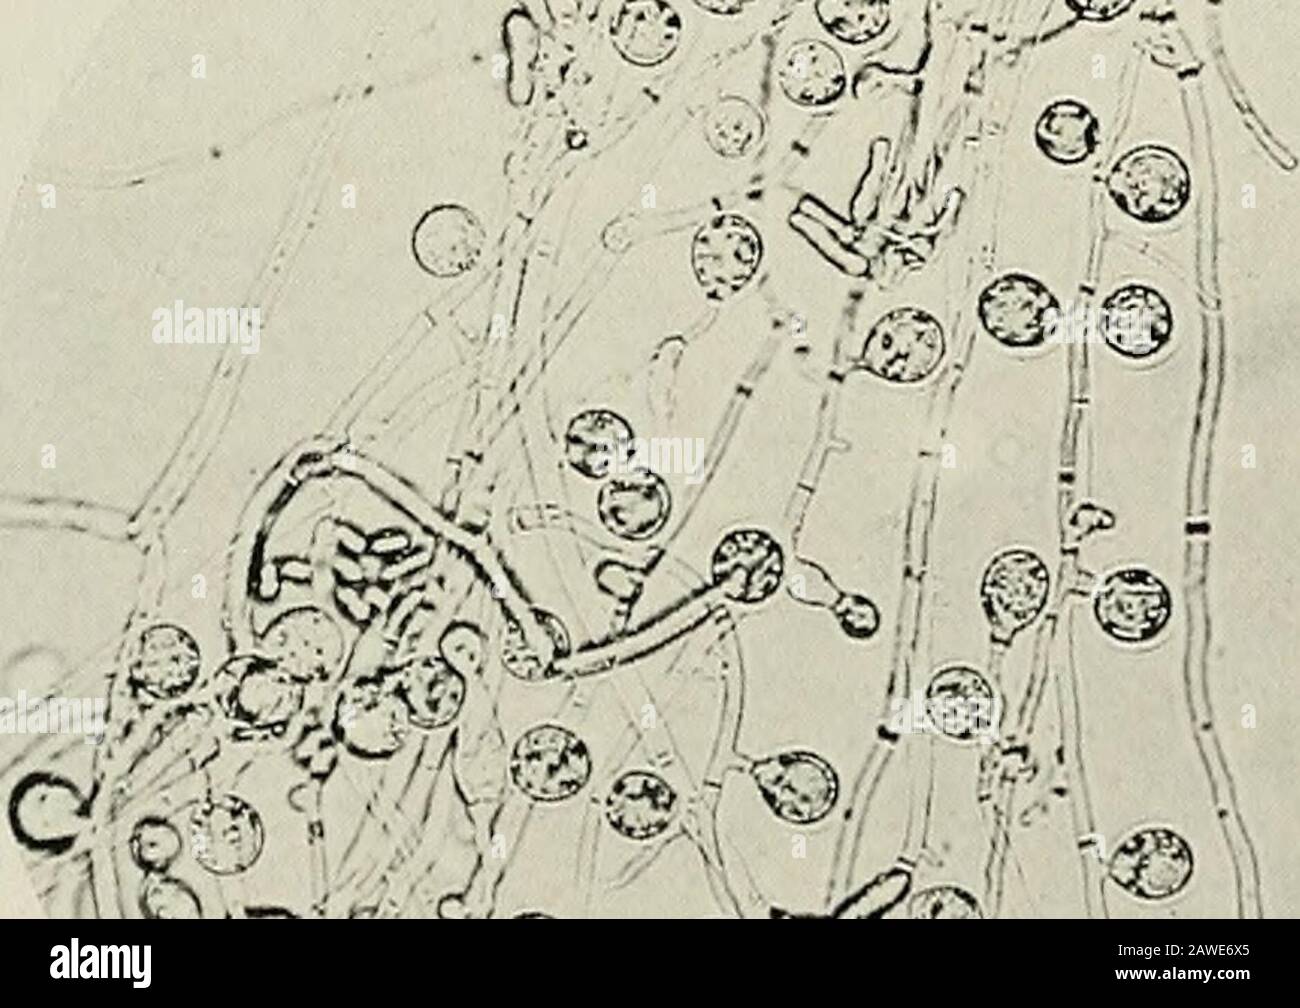 Annual report of the Maine Agricultural Experiment Station . Ku;. 59. rhotograph of the same apjjle cut in two to show extentof the decav. .- ^^?. ^^^v °» ,0 ?^ Fic. 60. Photo-micrograph of mycelium and young spore sacs ofEudonivciis niali. x iSo. v^- -#??• yv:. - Jf ?? Vr,. 61. Spore sacs ami mycelium, x 350. ? v V , Stock Photo